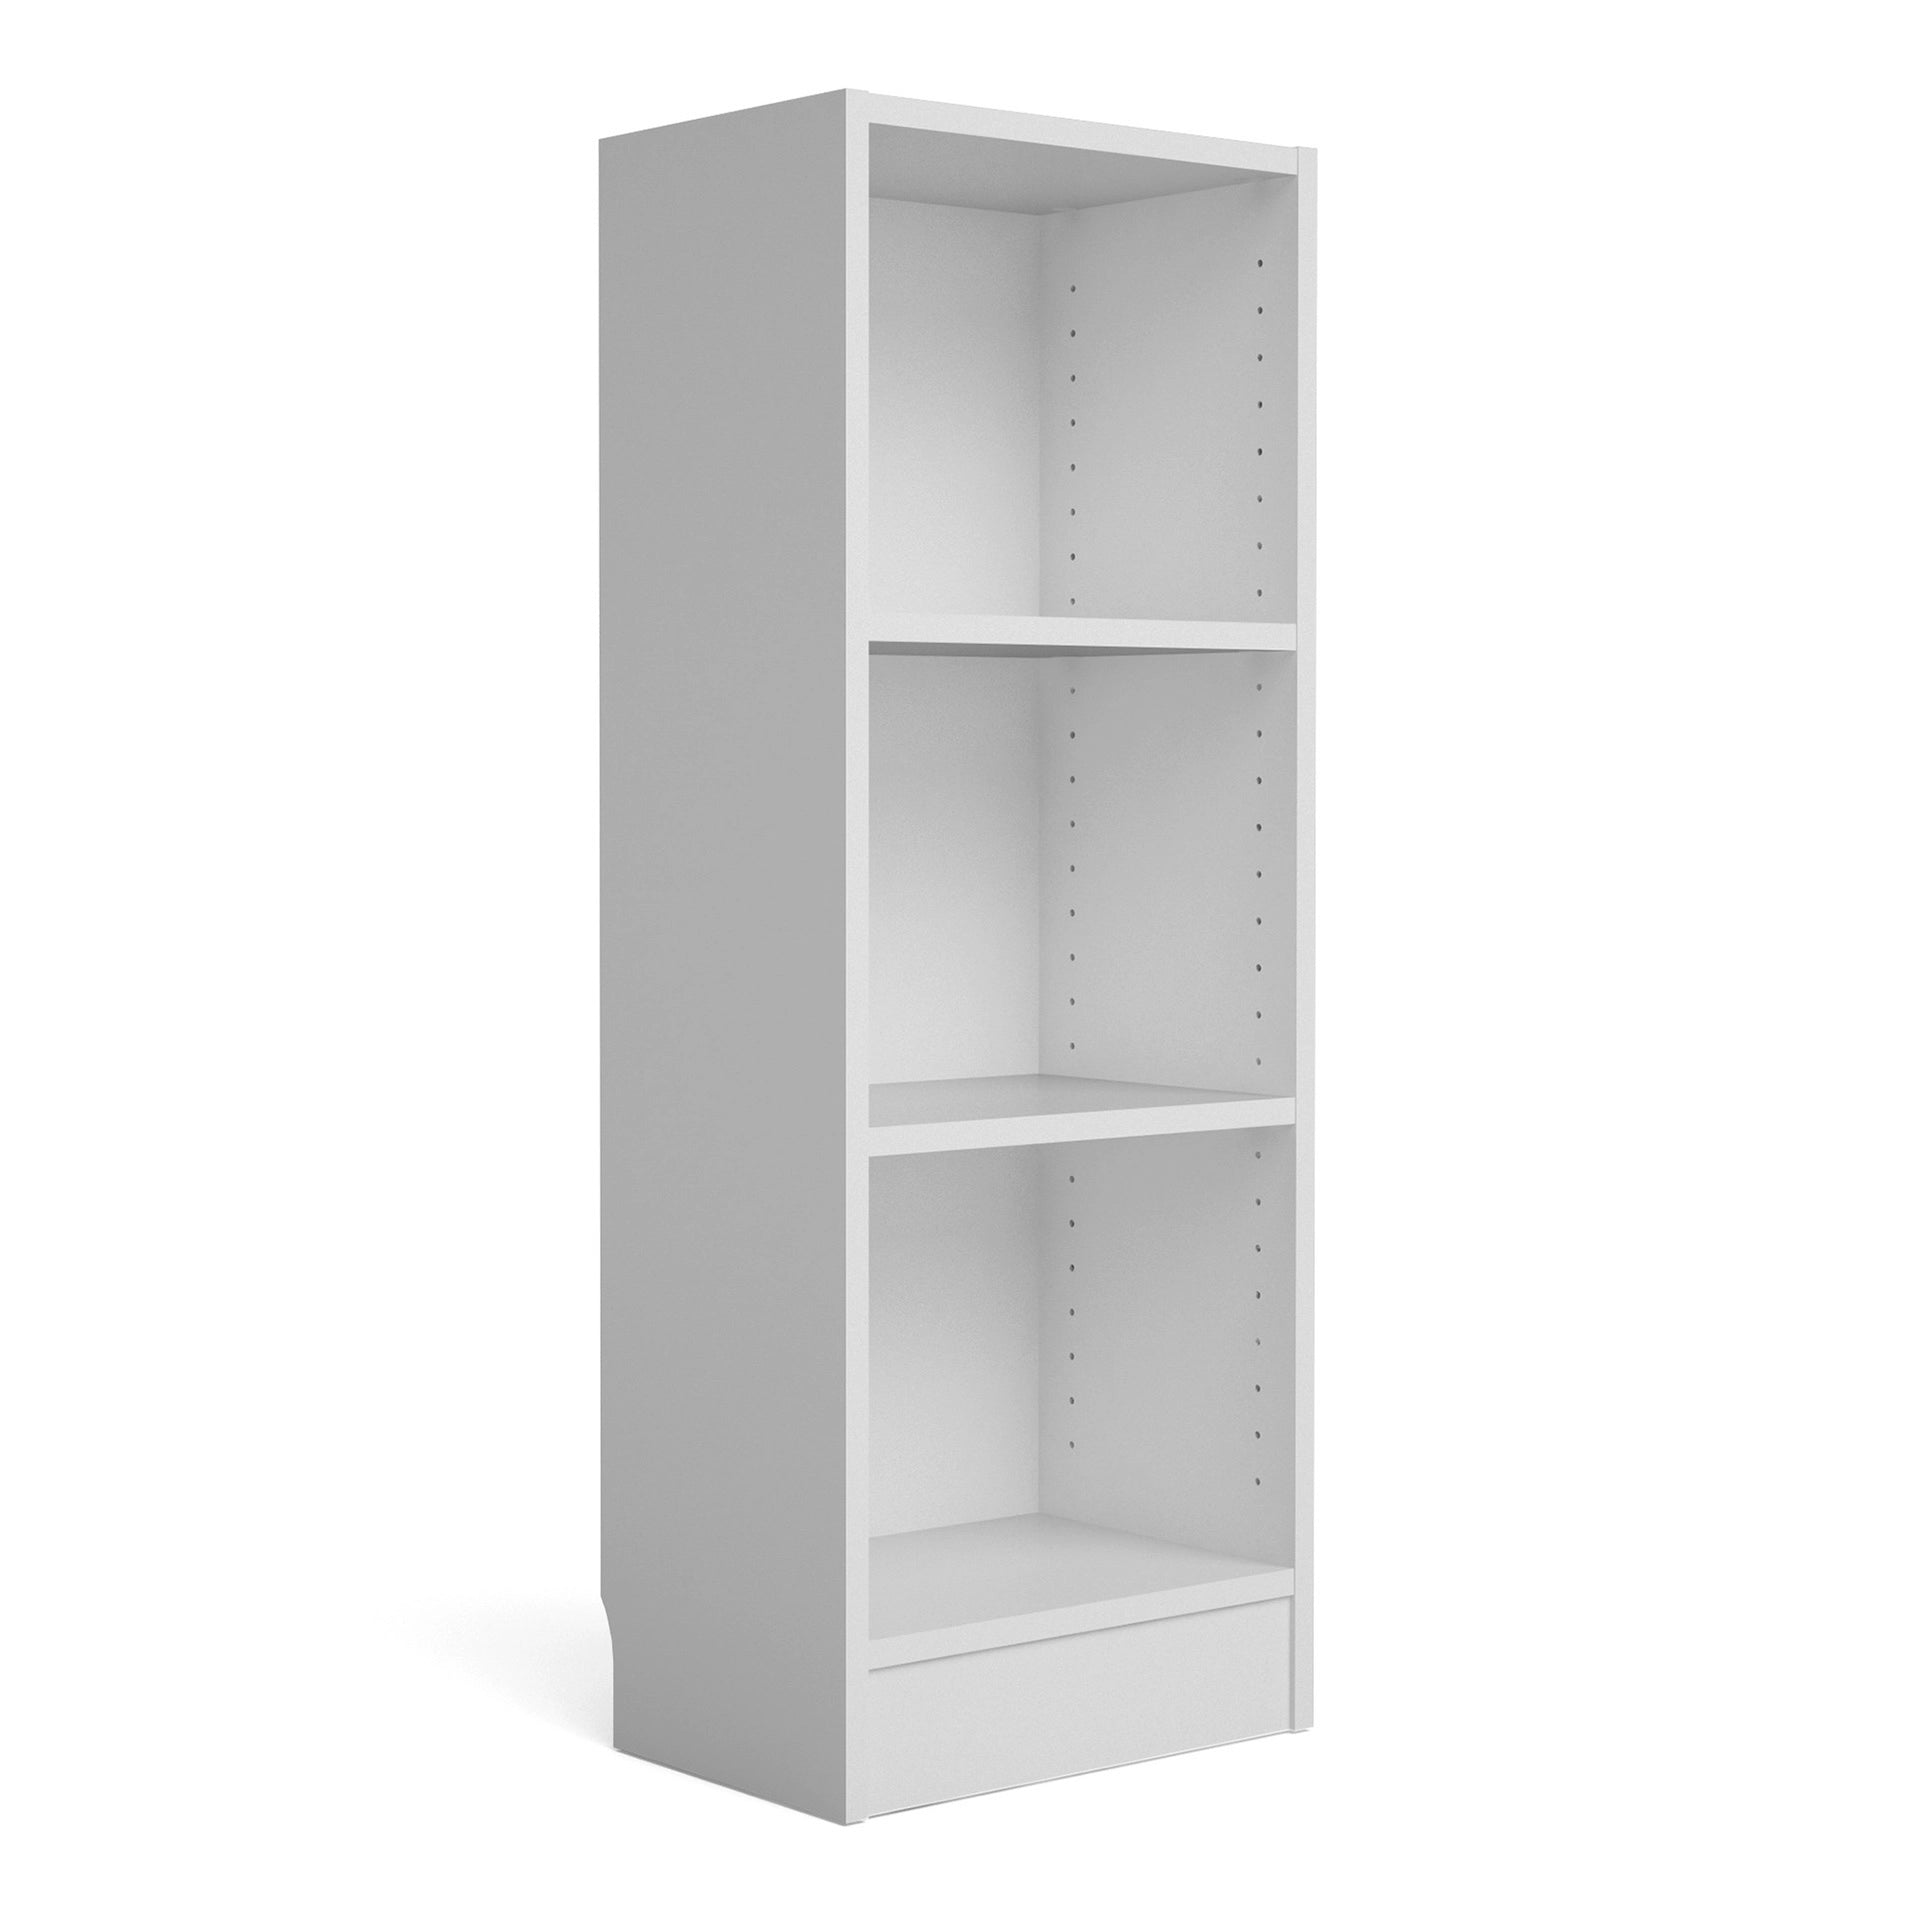 Furniture To Go Basic Low Narrow Bookcase (2 Shelves) in White